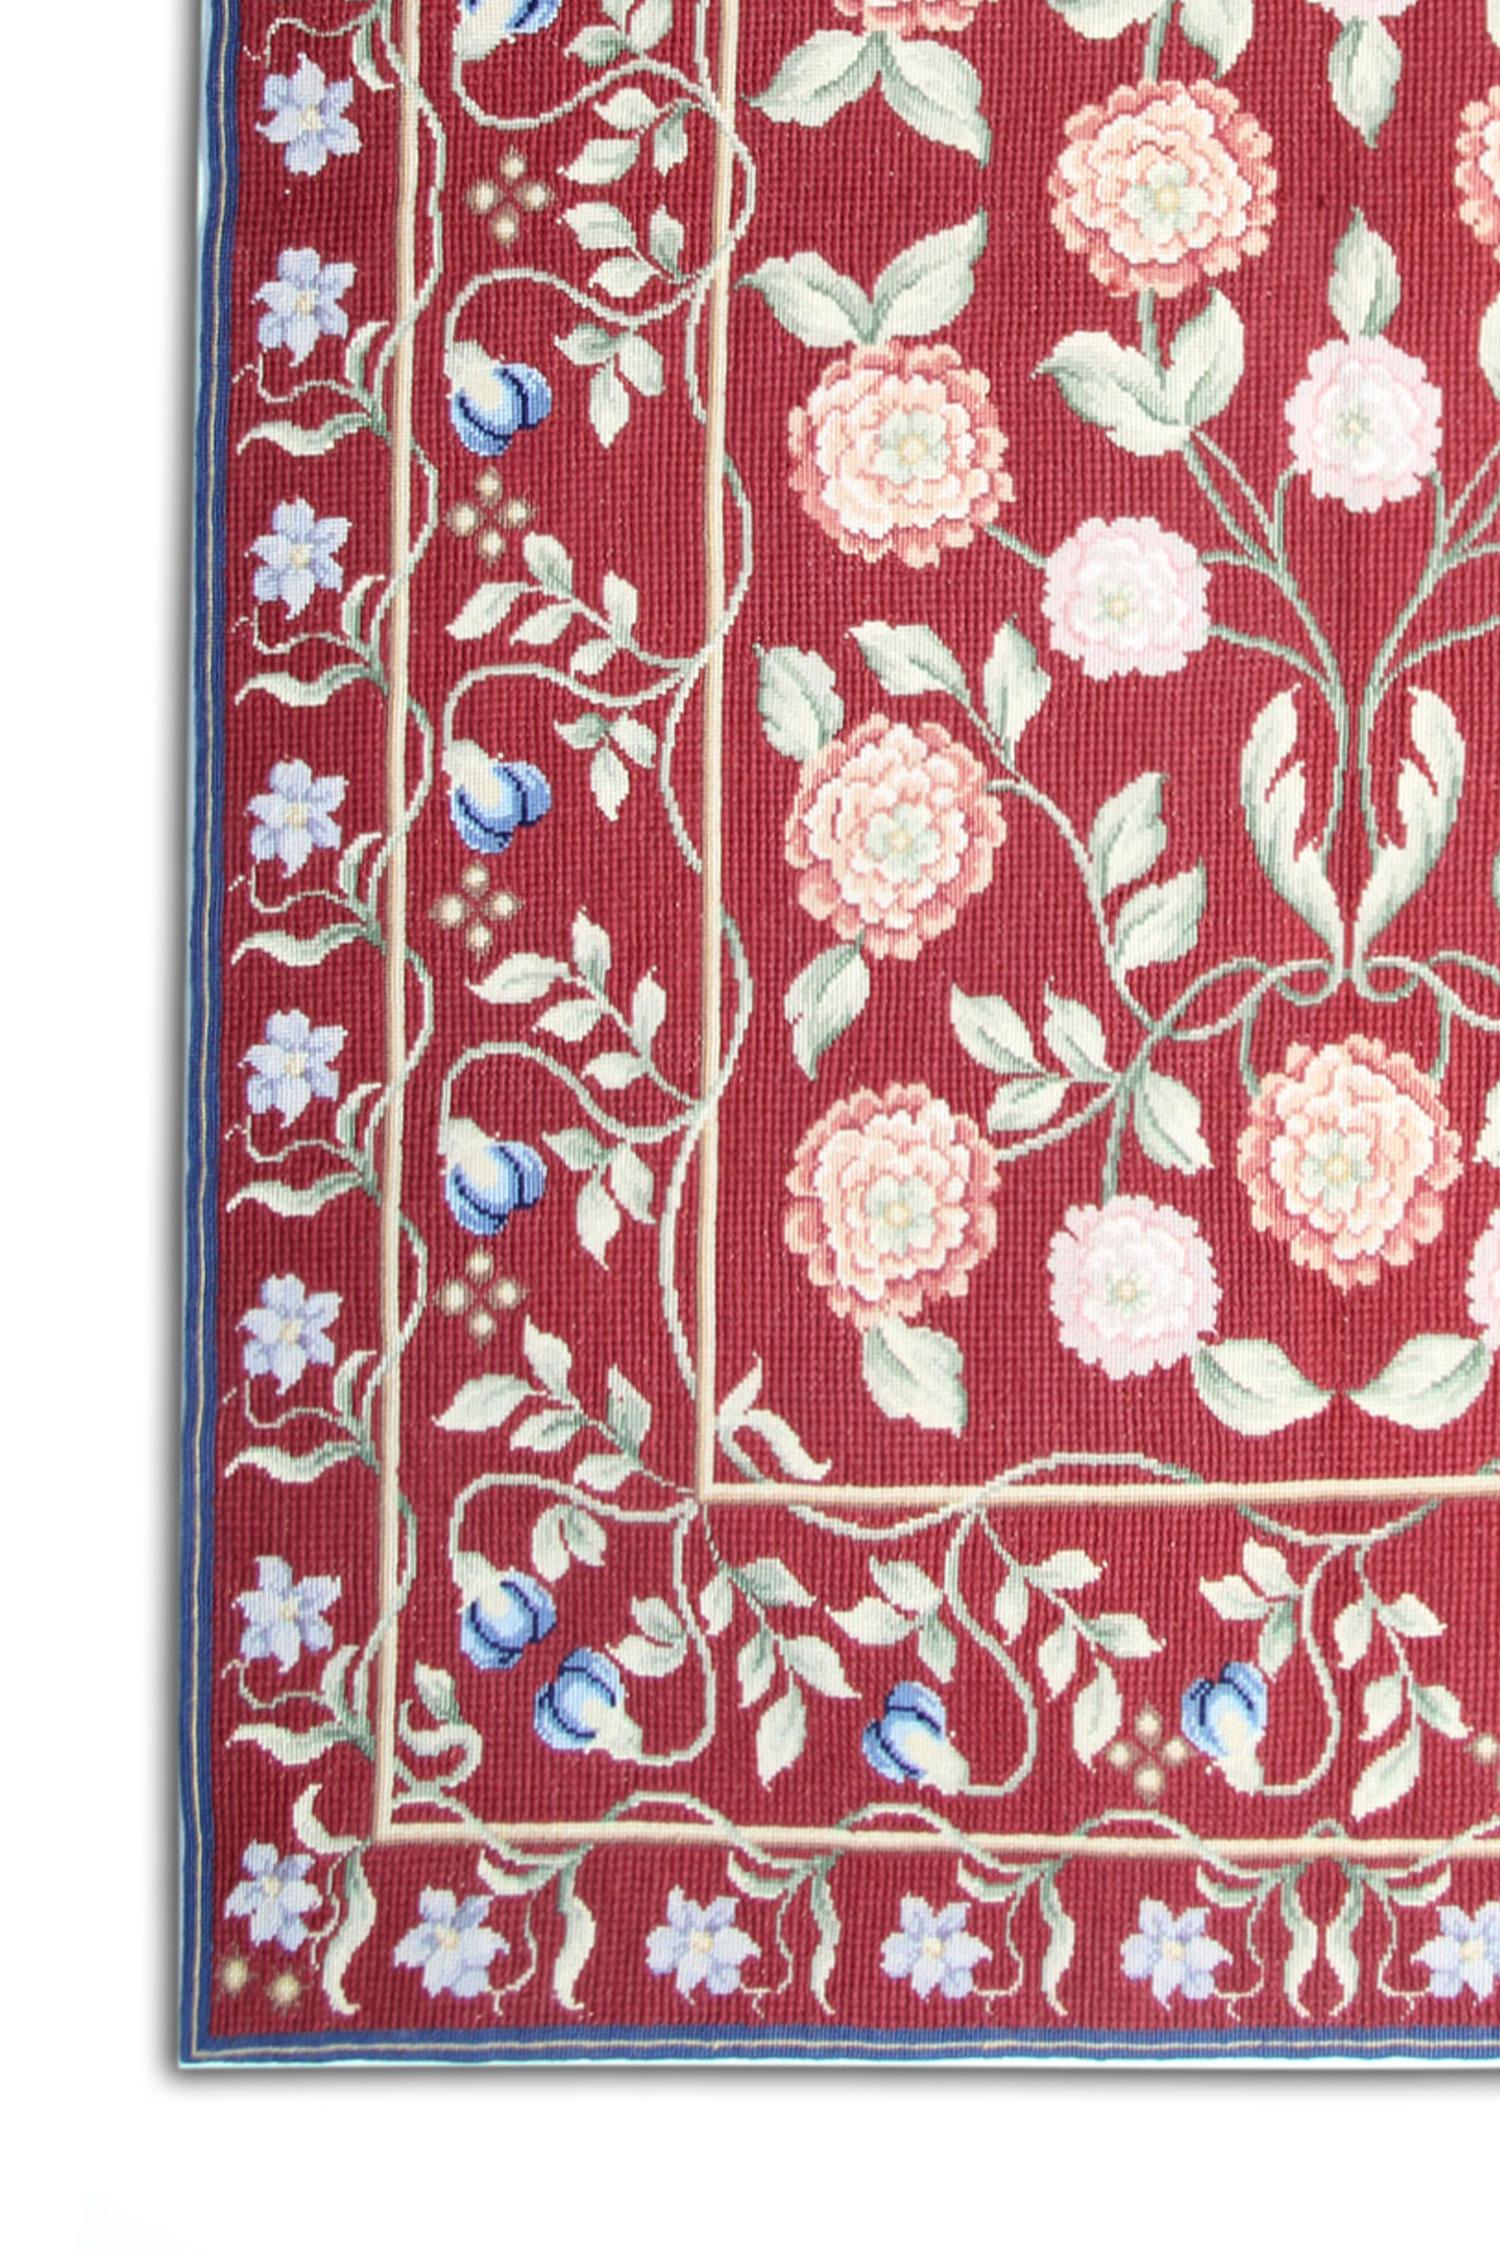 This beautifully handwoven Aubusson rug is sure to make a great accent piece in any room it’s introduced too. Deep red sits as the background colour, which has then been decorated with a pink, green and blue, symmetrical floral arrangement. The